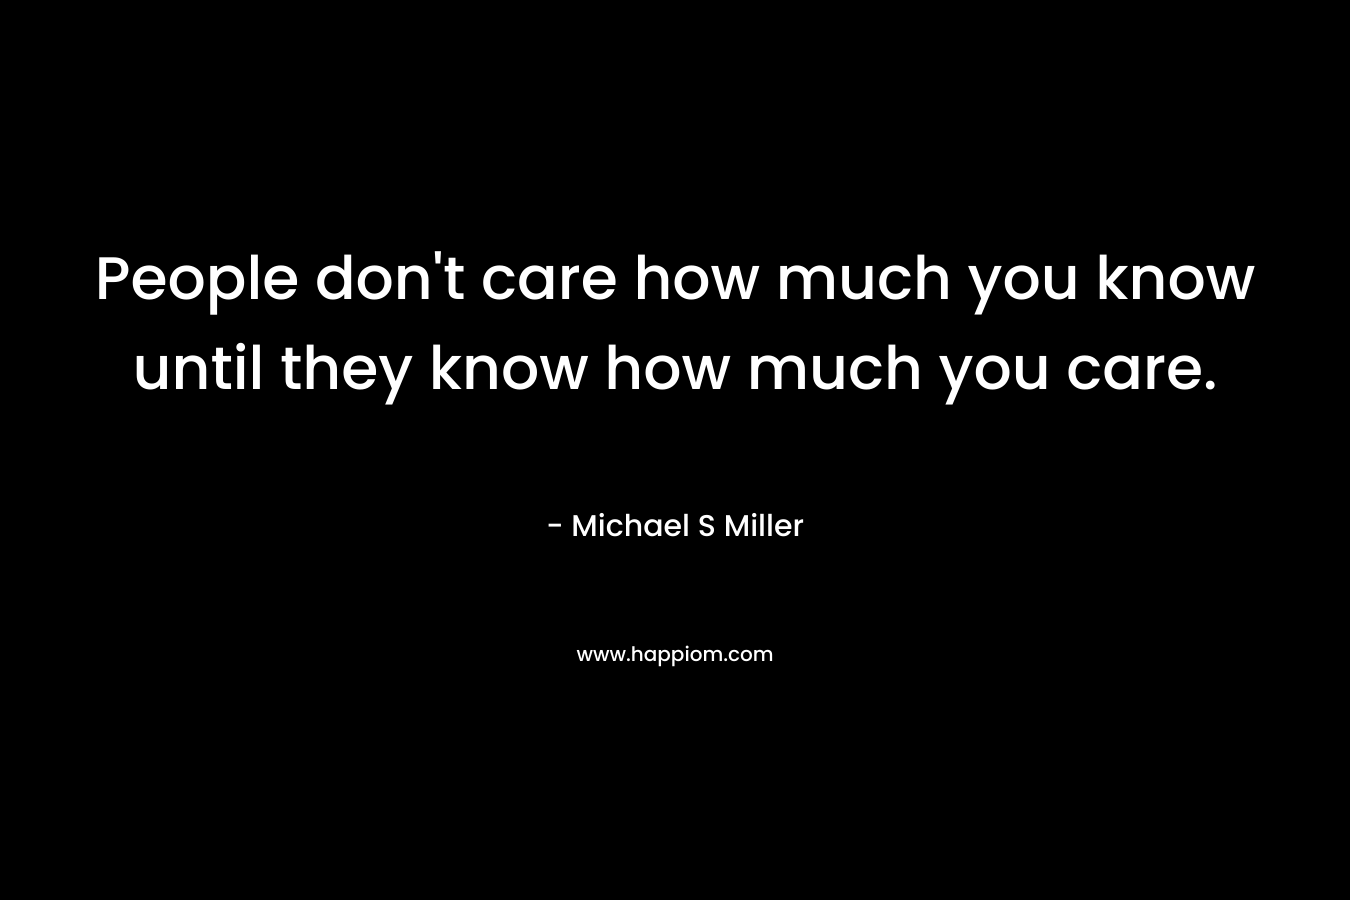 People don't care how much you know until they know how much you care.